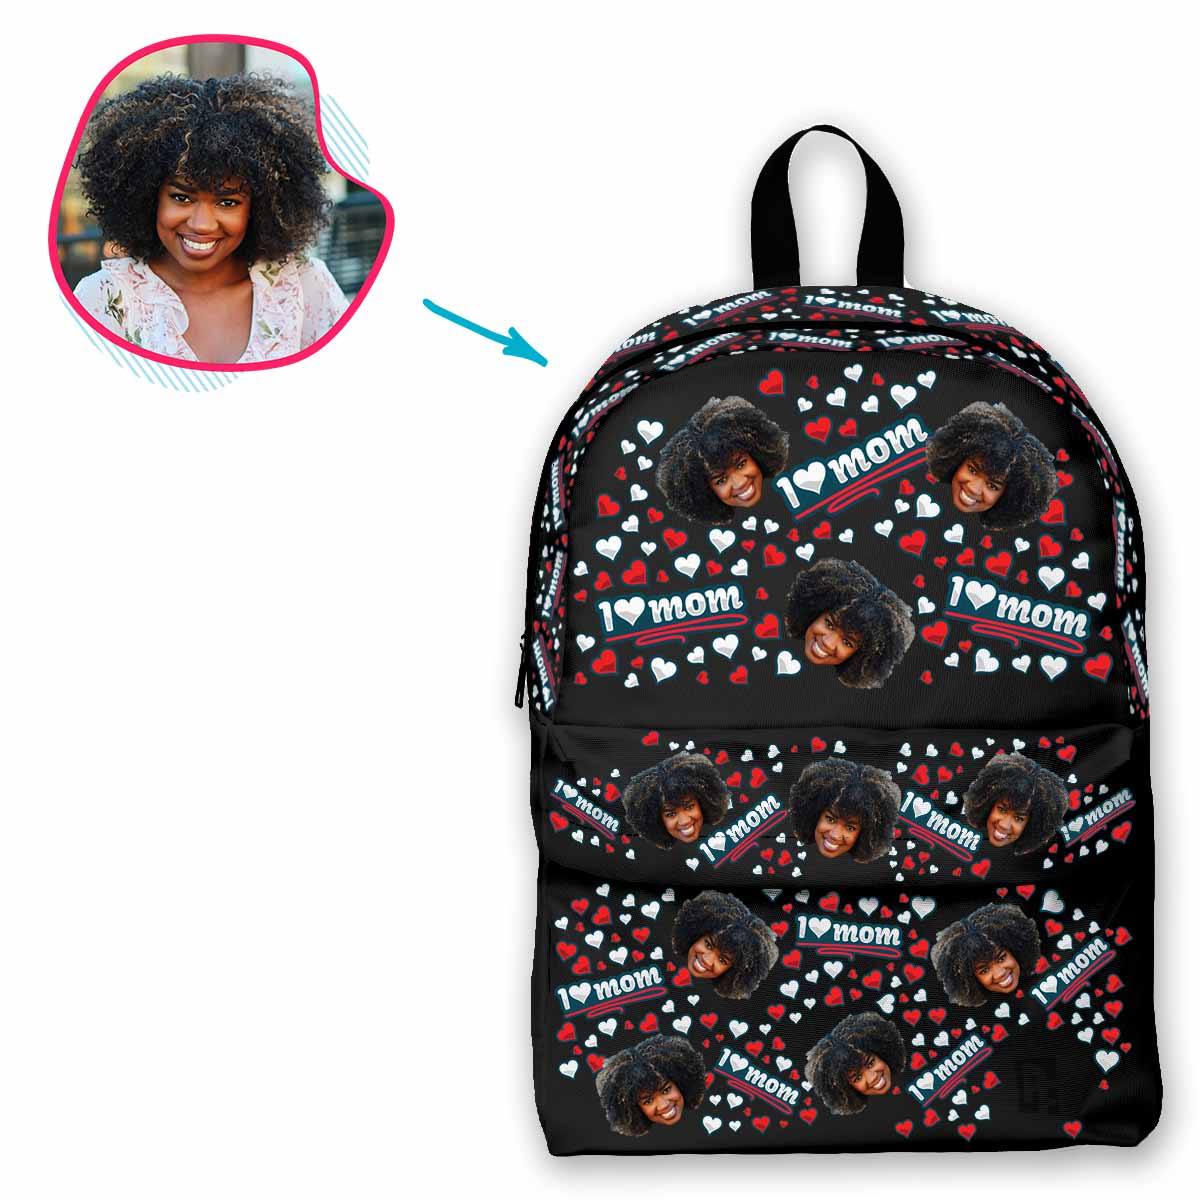 dark Love Mom classic backpack personalized with photo of face printed on it